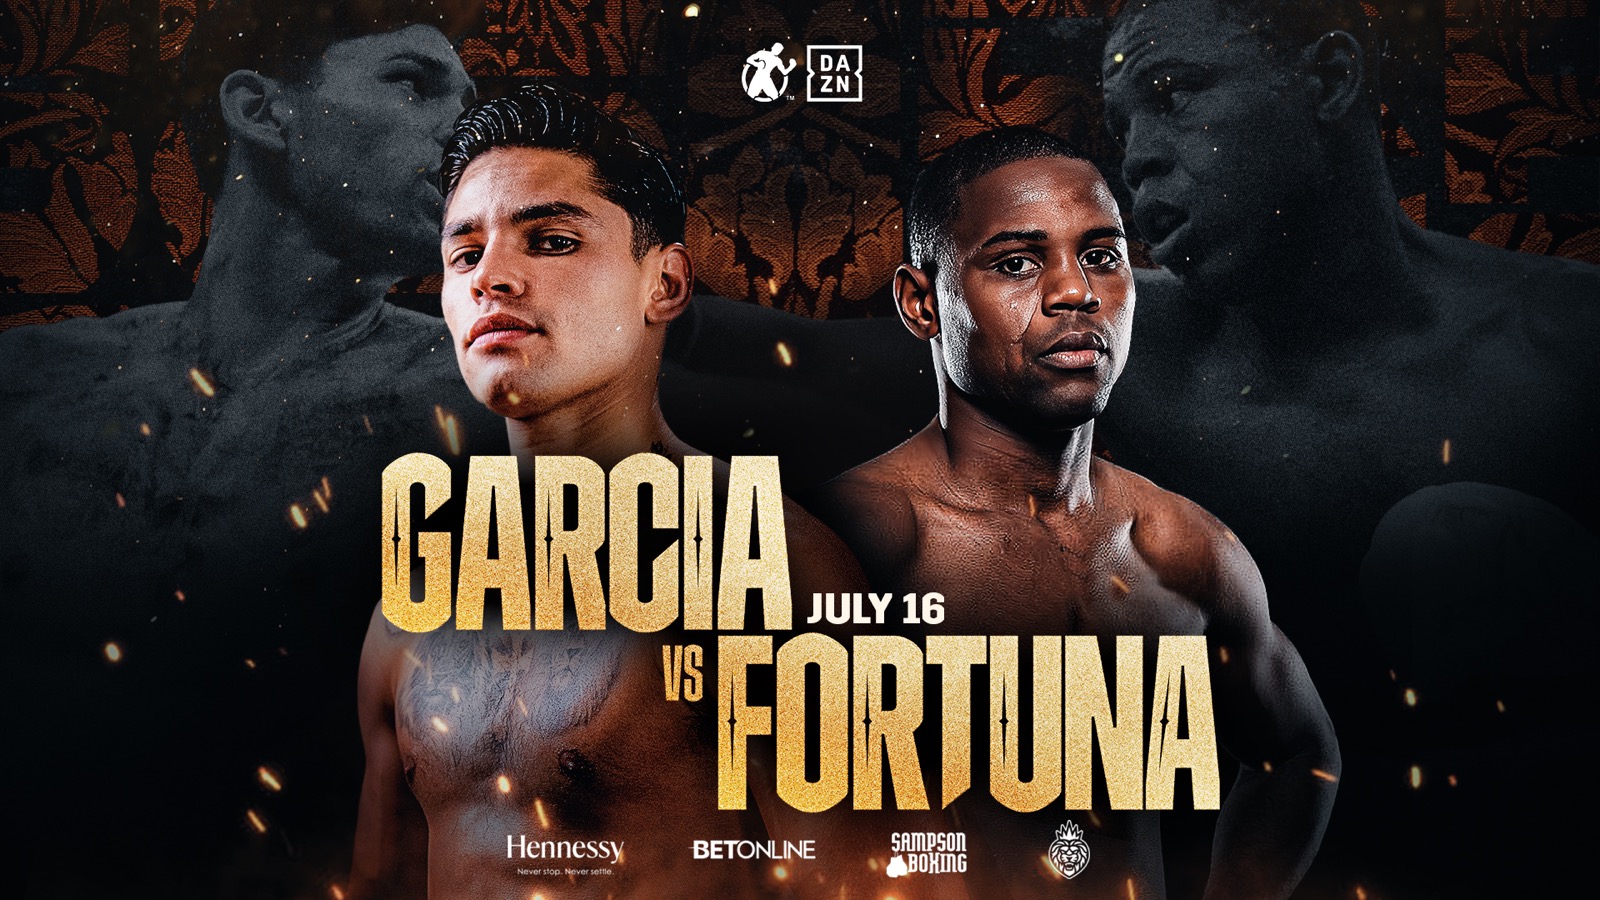 Image: Ryan Garcia says Javier Fortuna will wind up on his face or back this Saturday